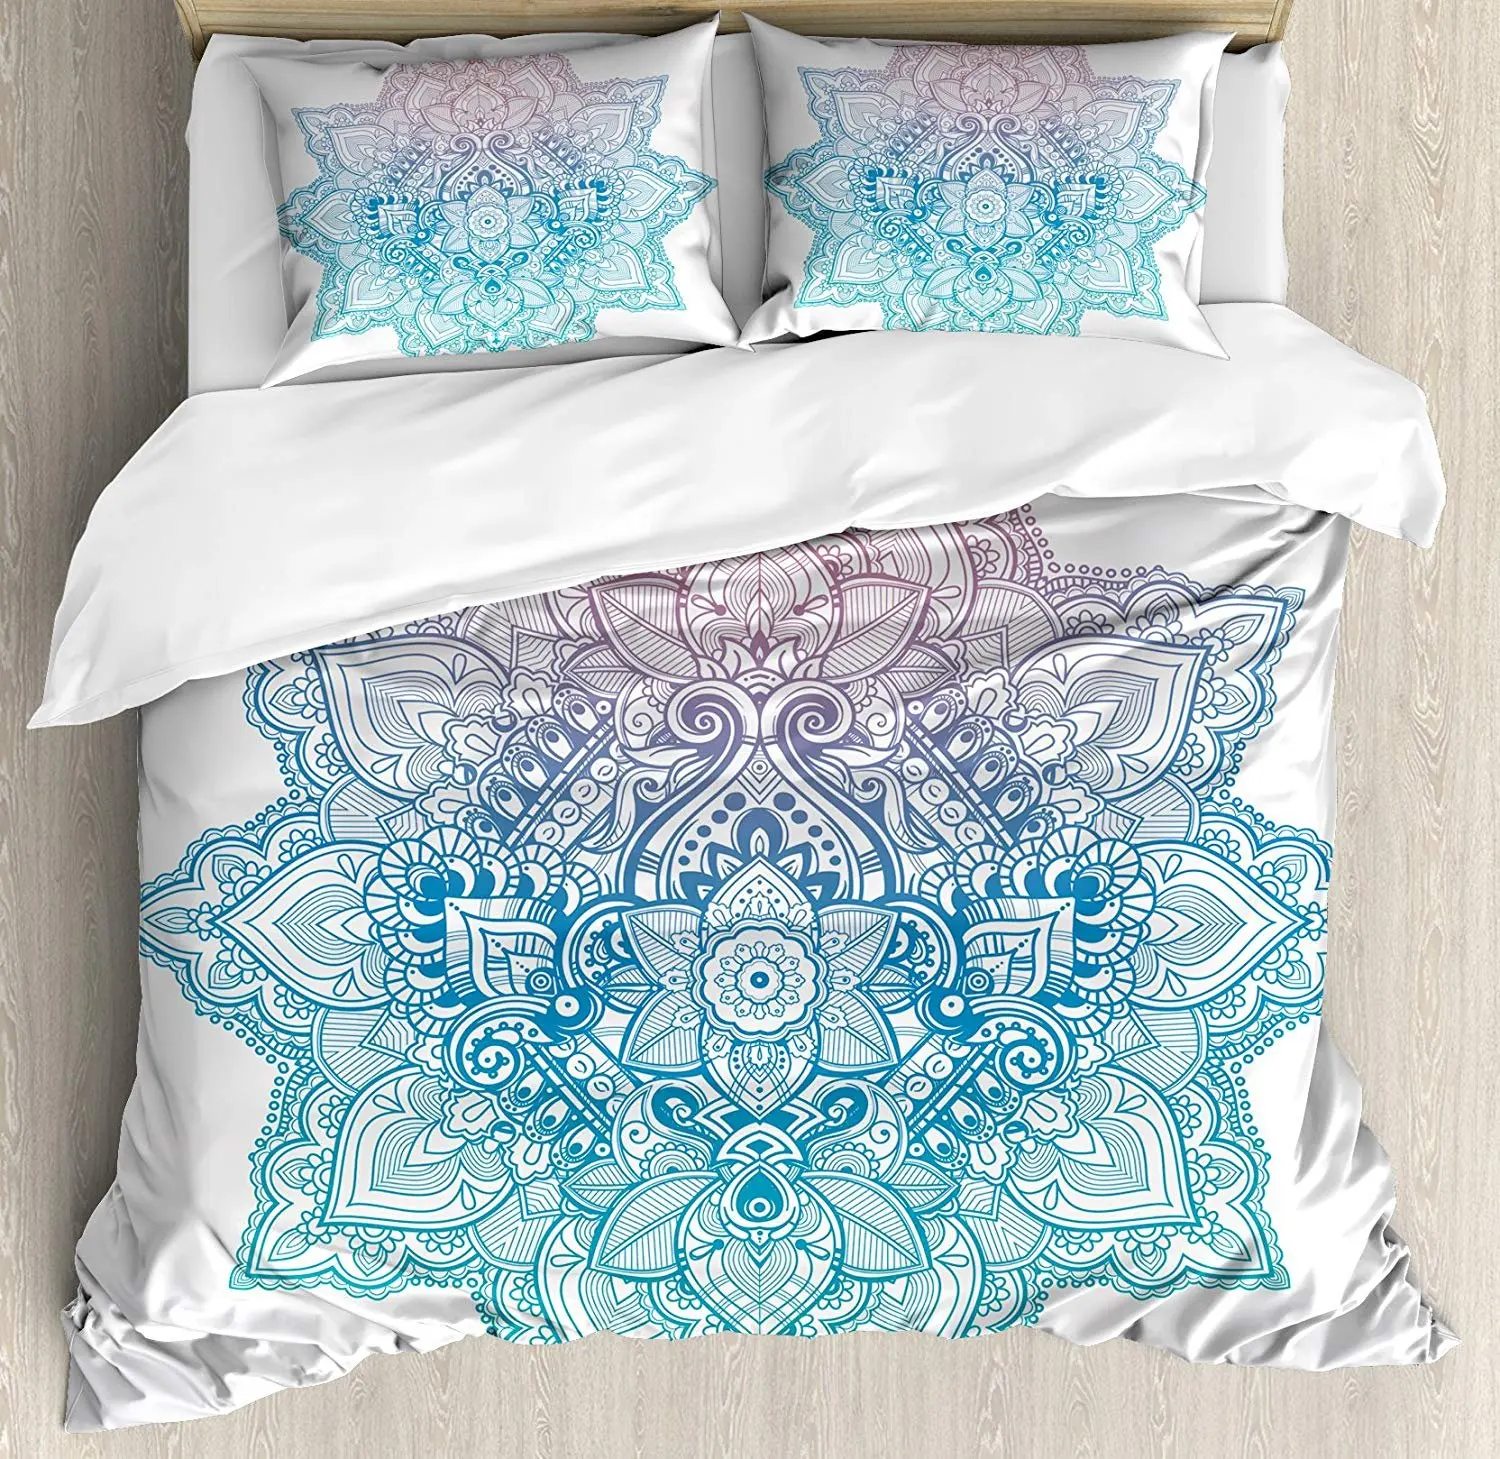 

Lotus Bedding Set Bohemian Tattoo Style Zen Pastel Toned Mandala Abstract Lotus Flower Design Pillowcases Quilt Cover For Home